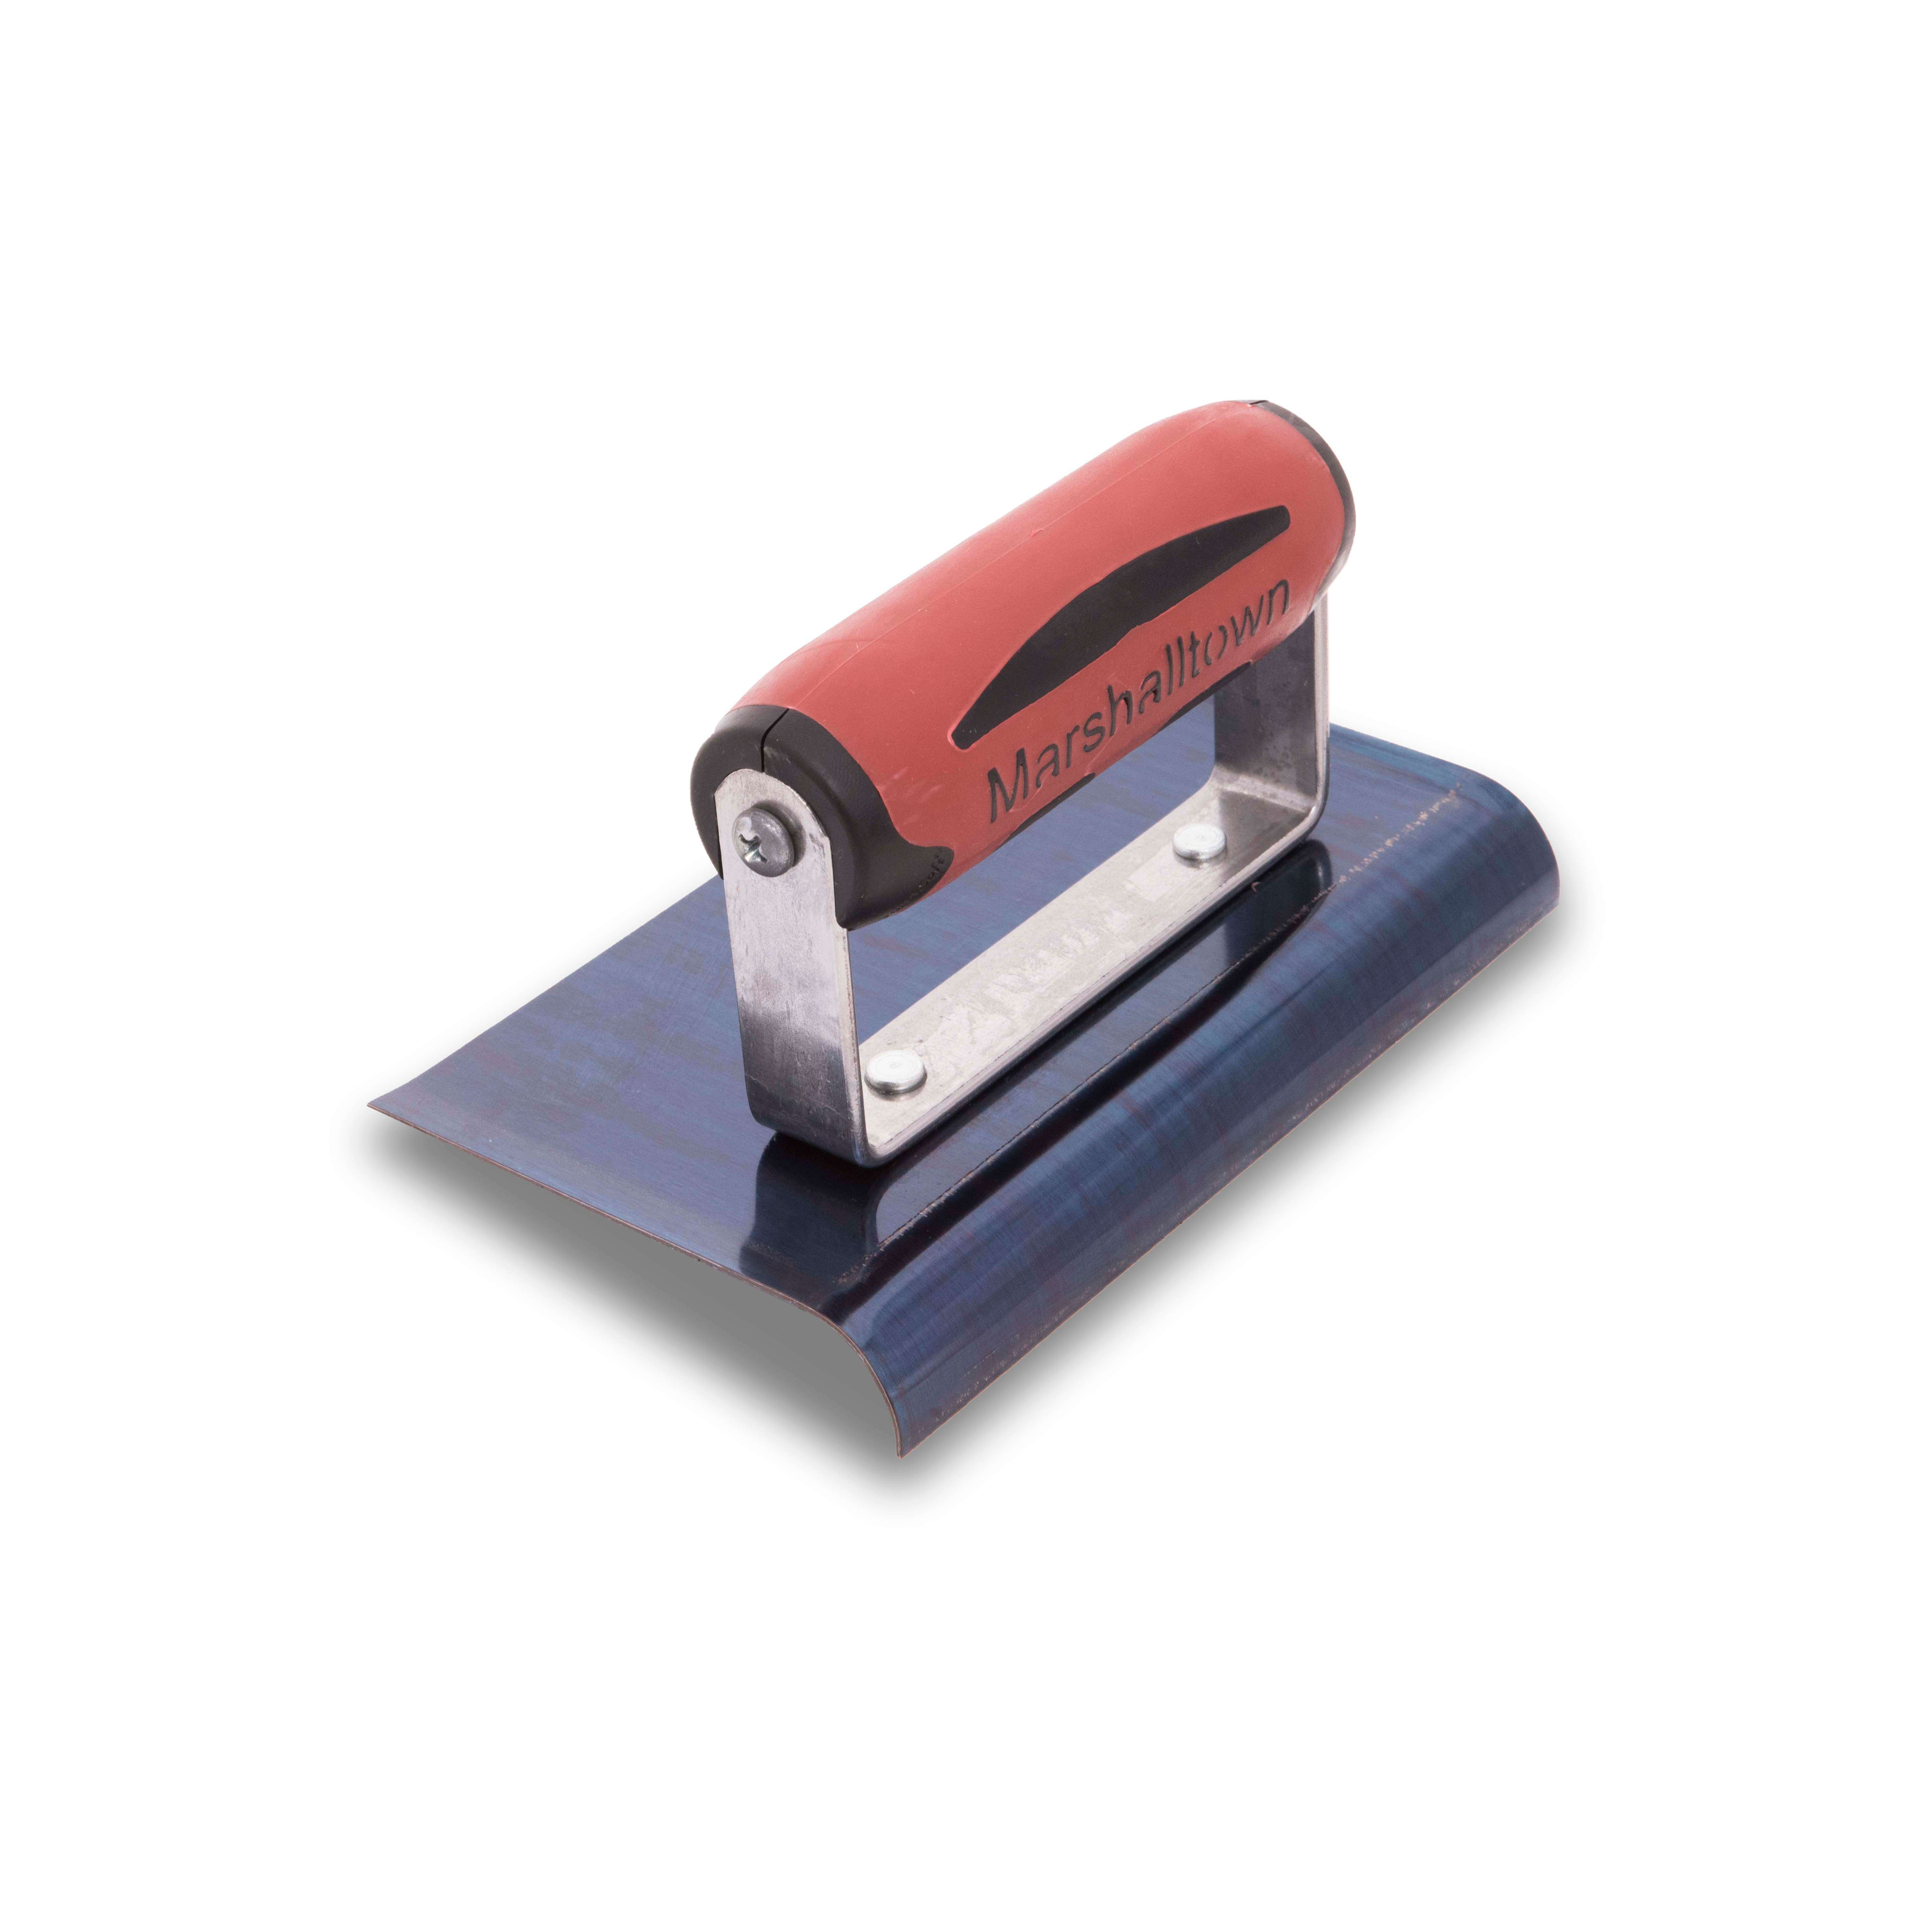 Marshalltown 138BD 6in x 4in Blue Steel Edger-Curved Ends 1/2R, 5/8L-DuraSoft Handle 138BD